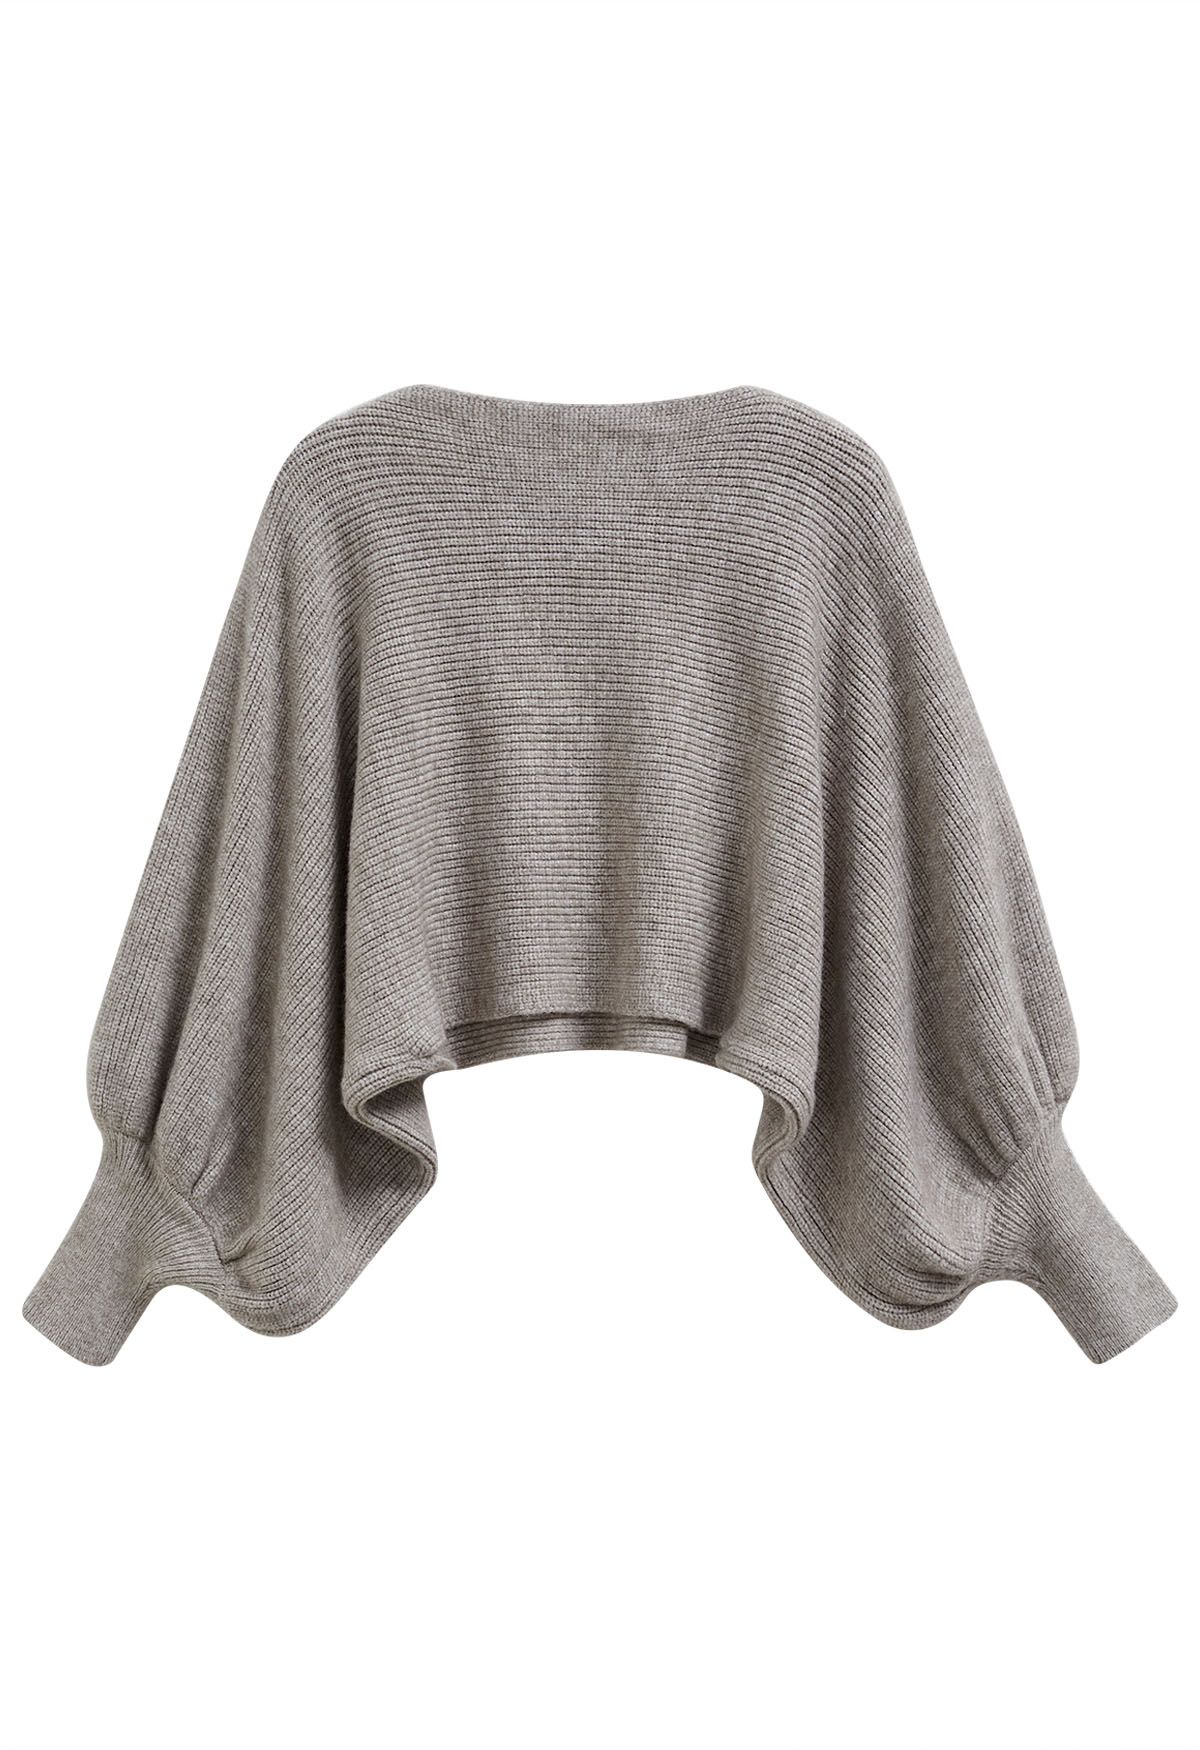 Exaggerated Bubble Sleeve Boat Neck Knit Top in Taupe